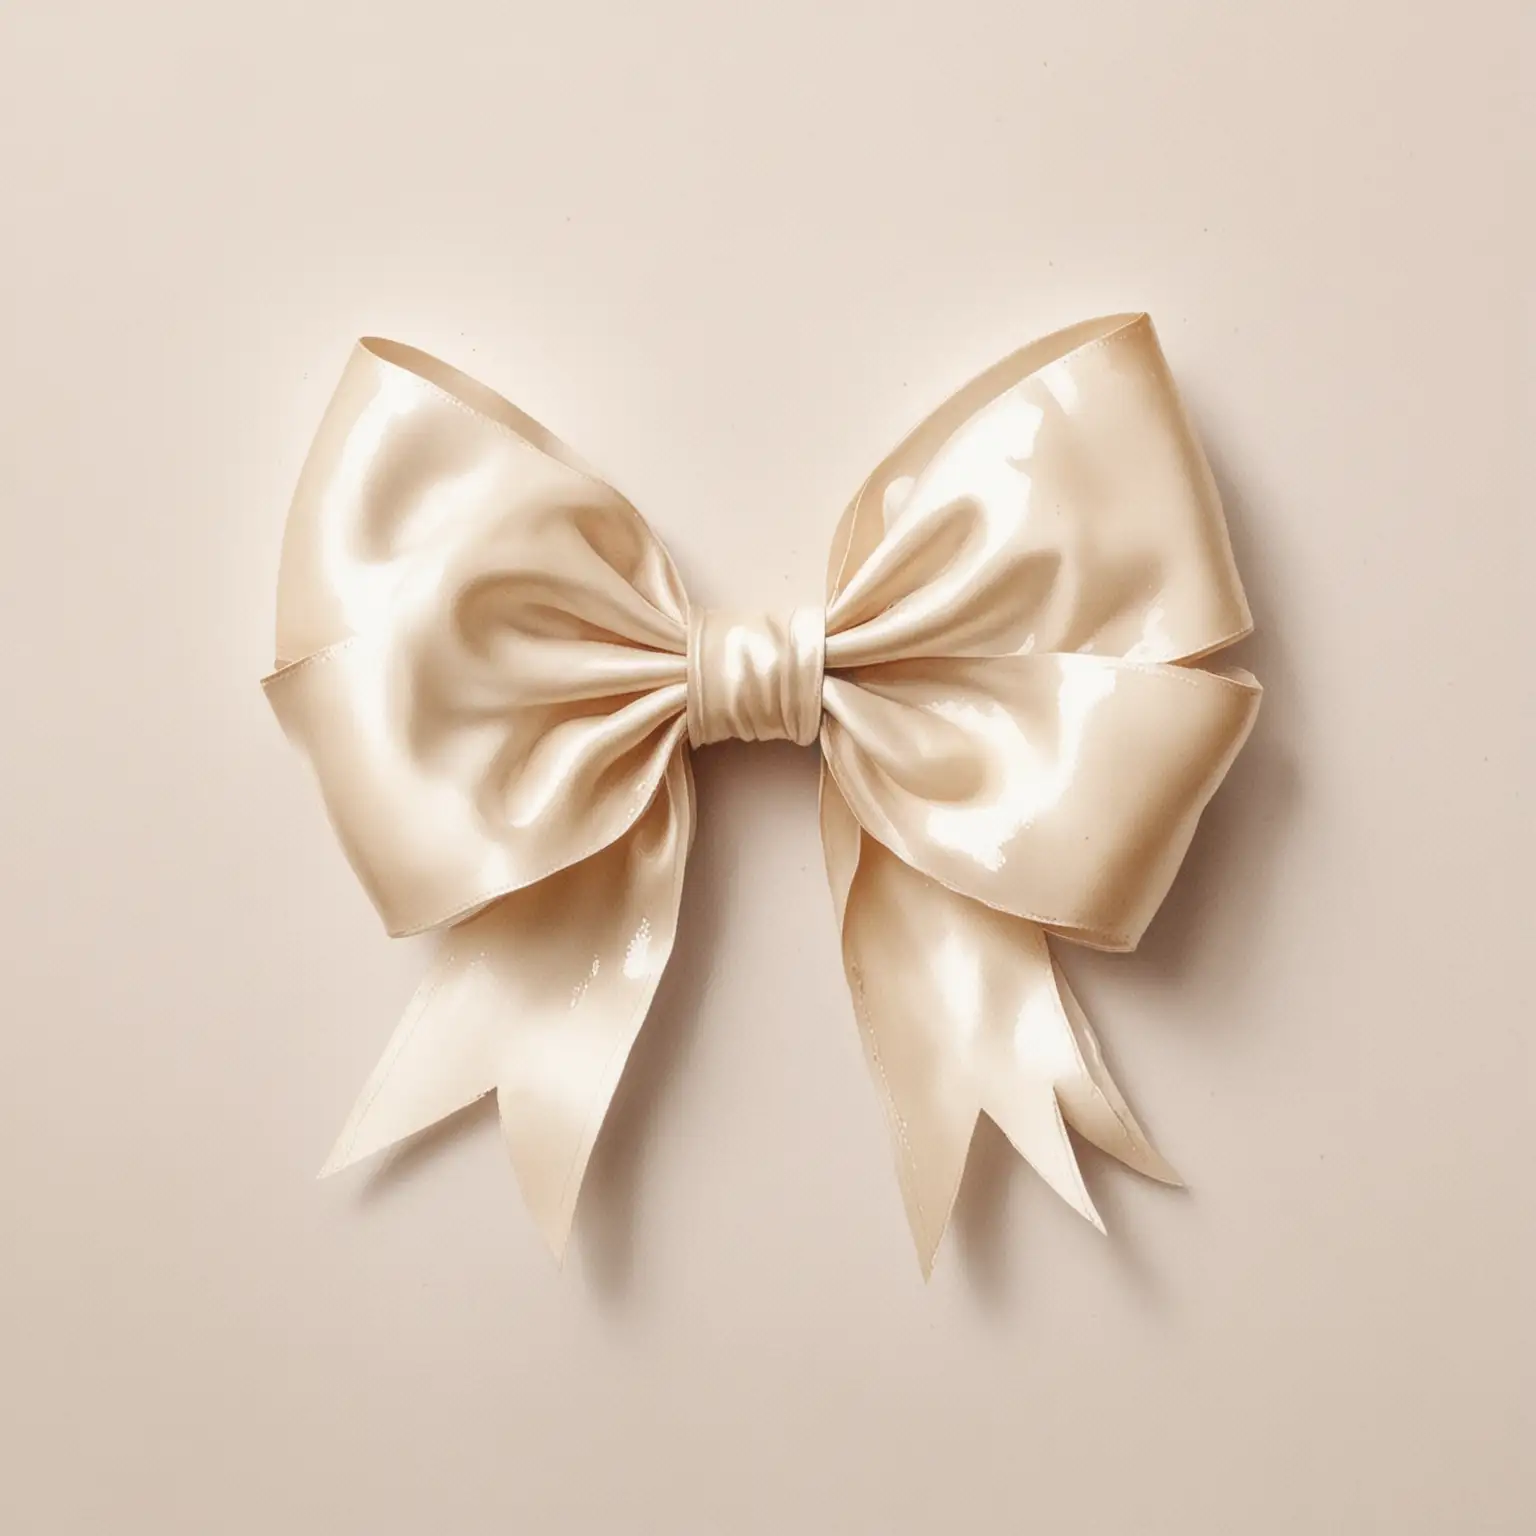 watercolour illustration of a cream satin bow on a solid white background